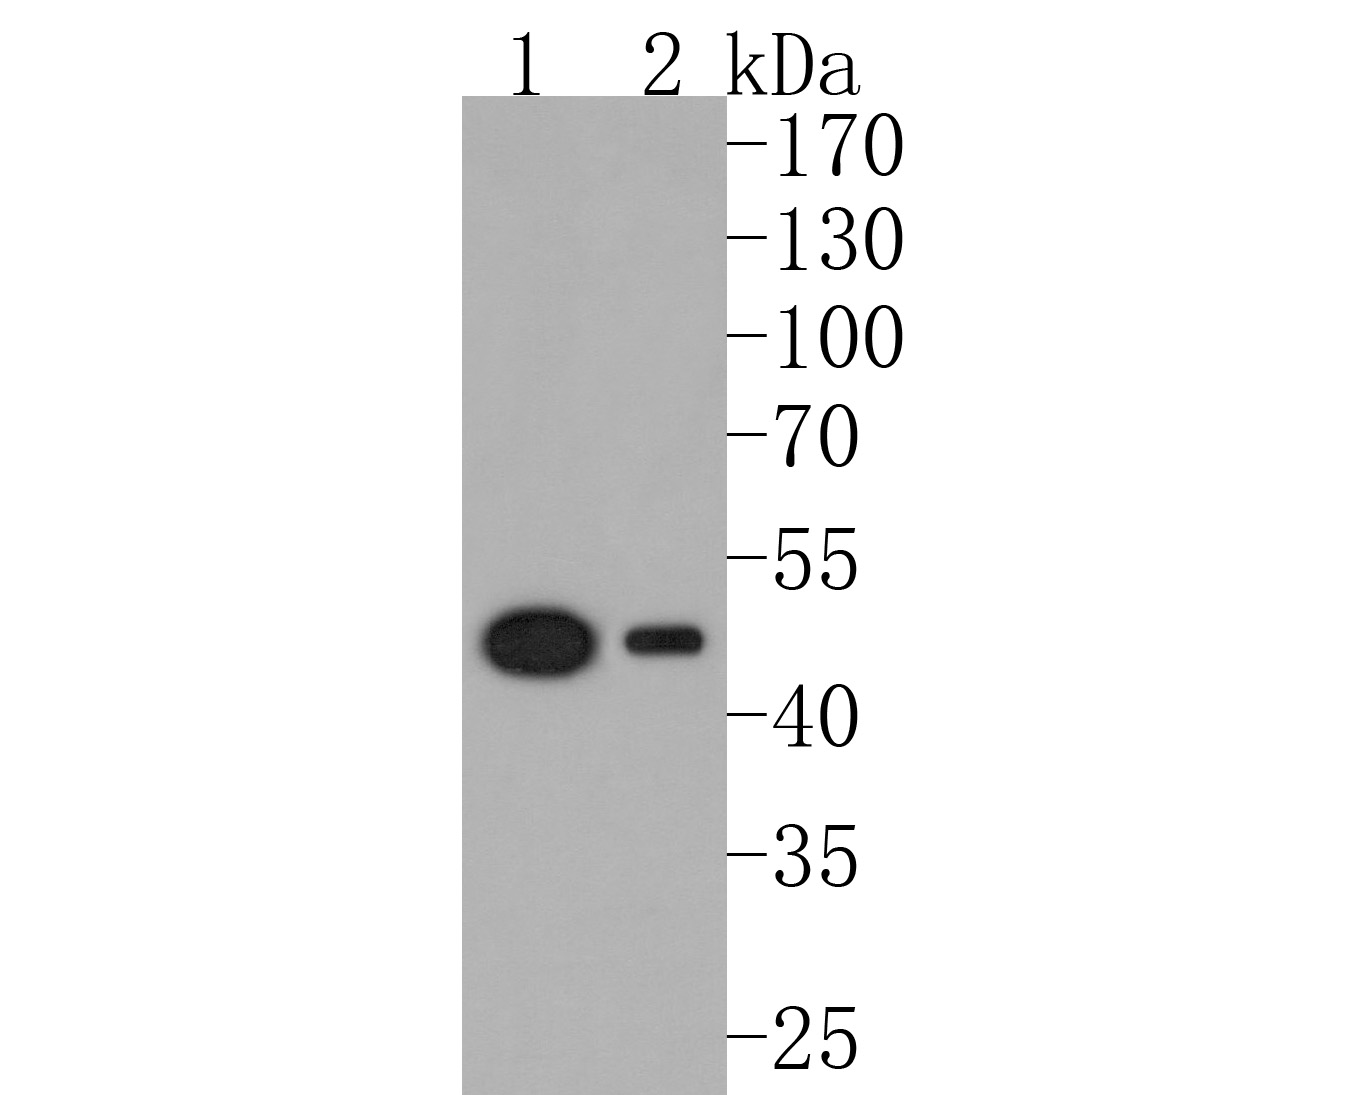 Western blot analysis of Elp4 on different lysates. Proteins were transferred to a PVDF membrane and blocked with 5% NFDM/TBST for 1 hour at room temperature. The primary antibody (HA720054, 1/500) was used in 5% NFDM/TBST at room temperature for 2 hours. Goat Anti-Rabbit IgG - HRP Secondary Antibody (HA1001) at 1:200,000 dilution was used for 1 hour at room temperature.<br />
Positive control: <br />
Lane 1: NIH/3T3 cell lysate<br />
Lane 2: Hela cell lysate